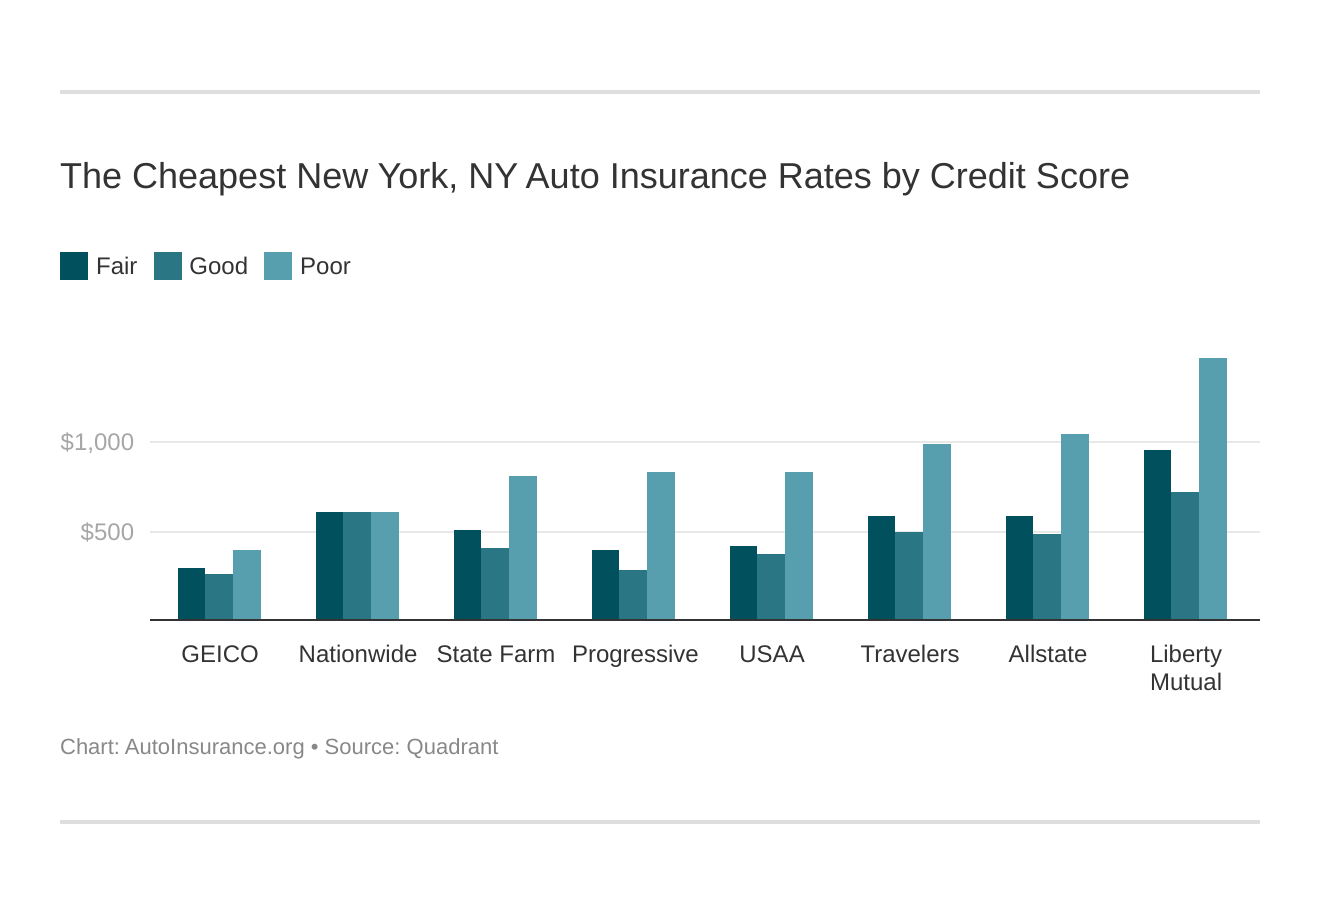 The Cheapest New York, NY Auto Insurance Rates by Credit Score